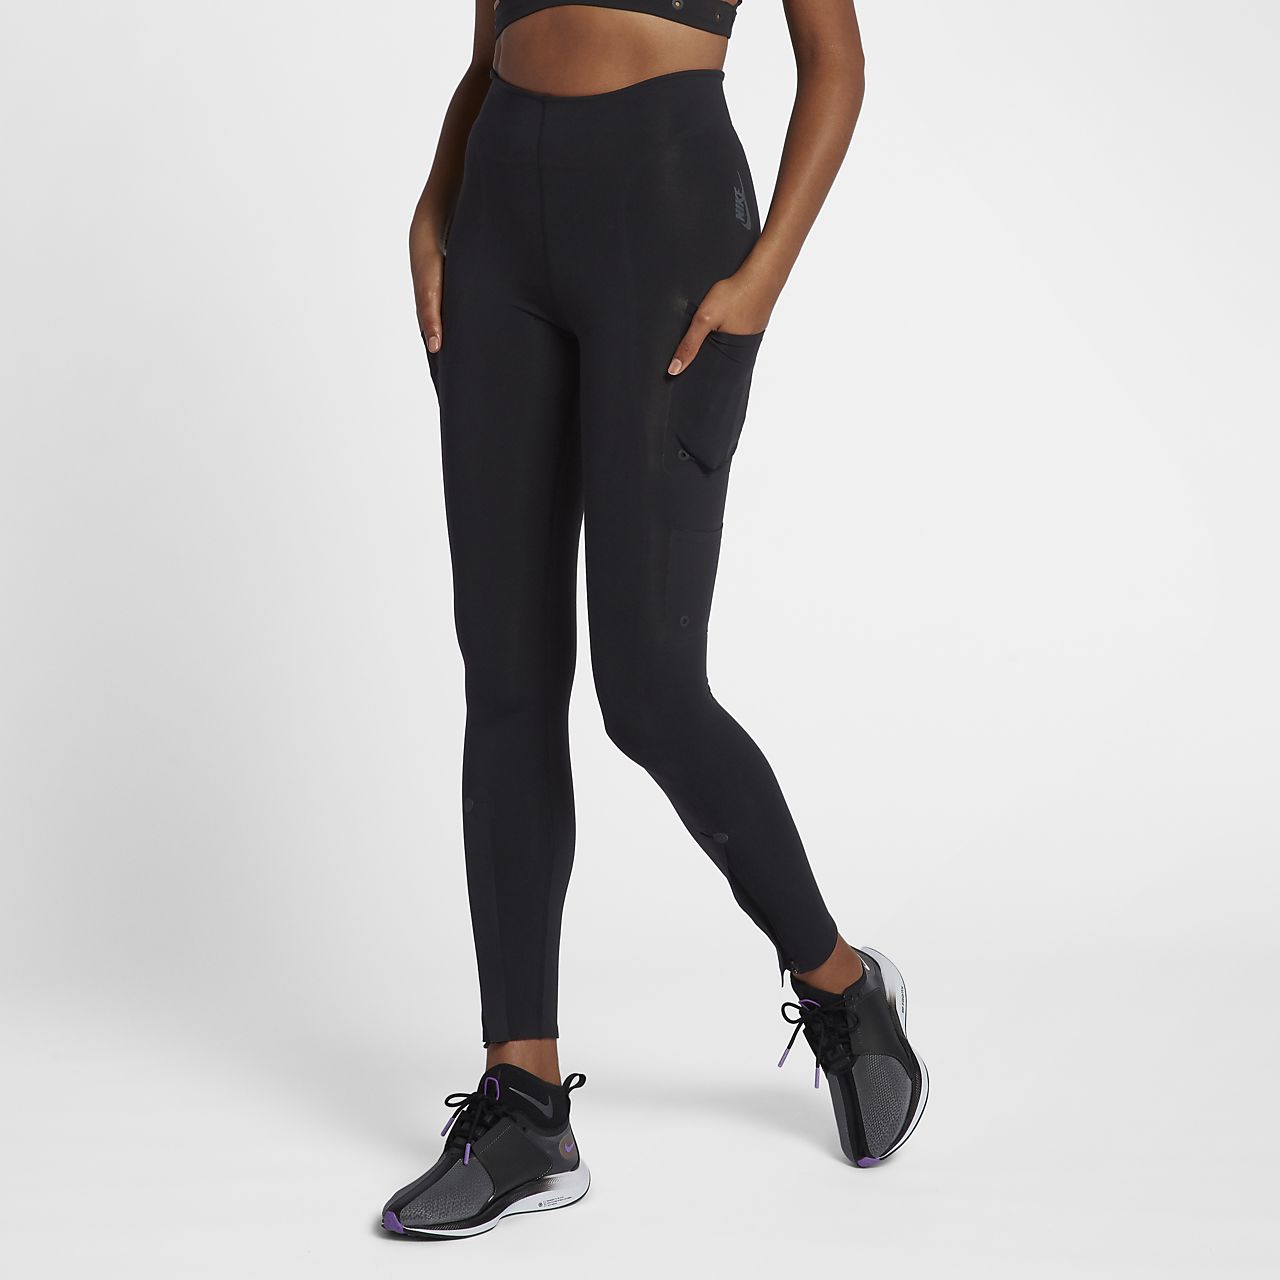 nike tights with pockets Sale,up to 75 